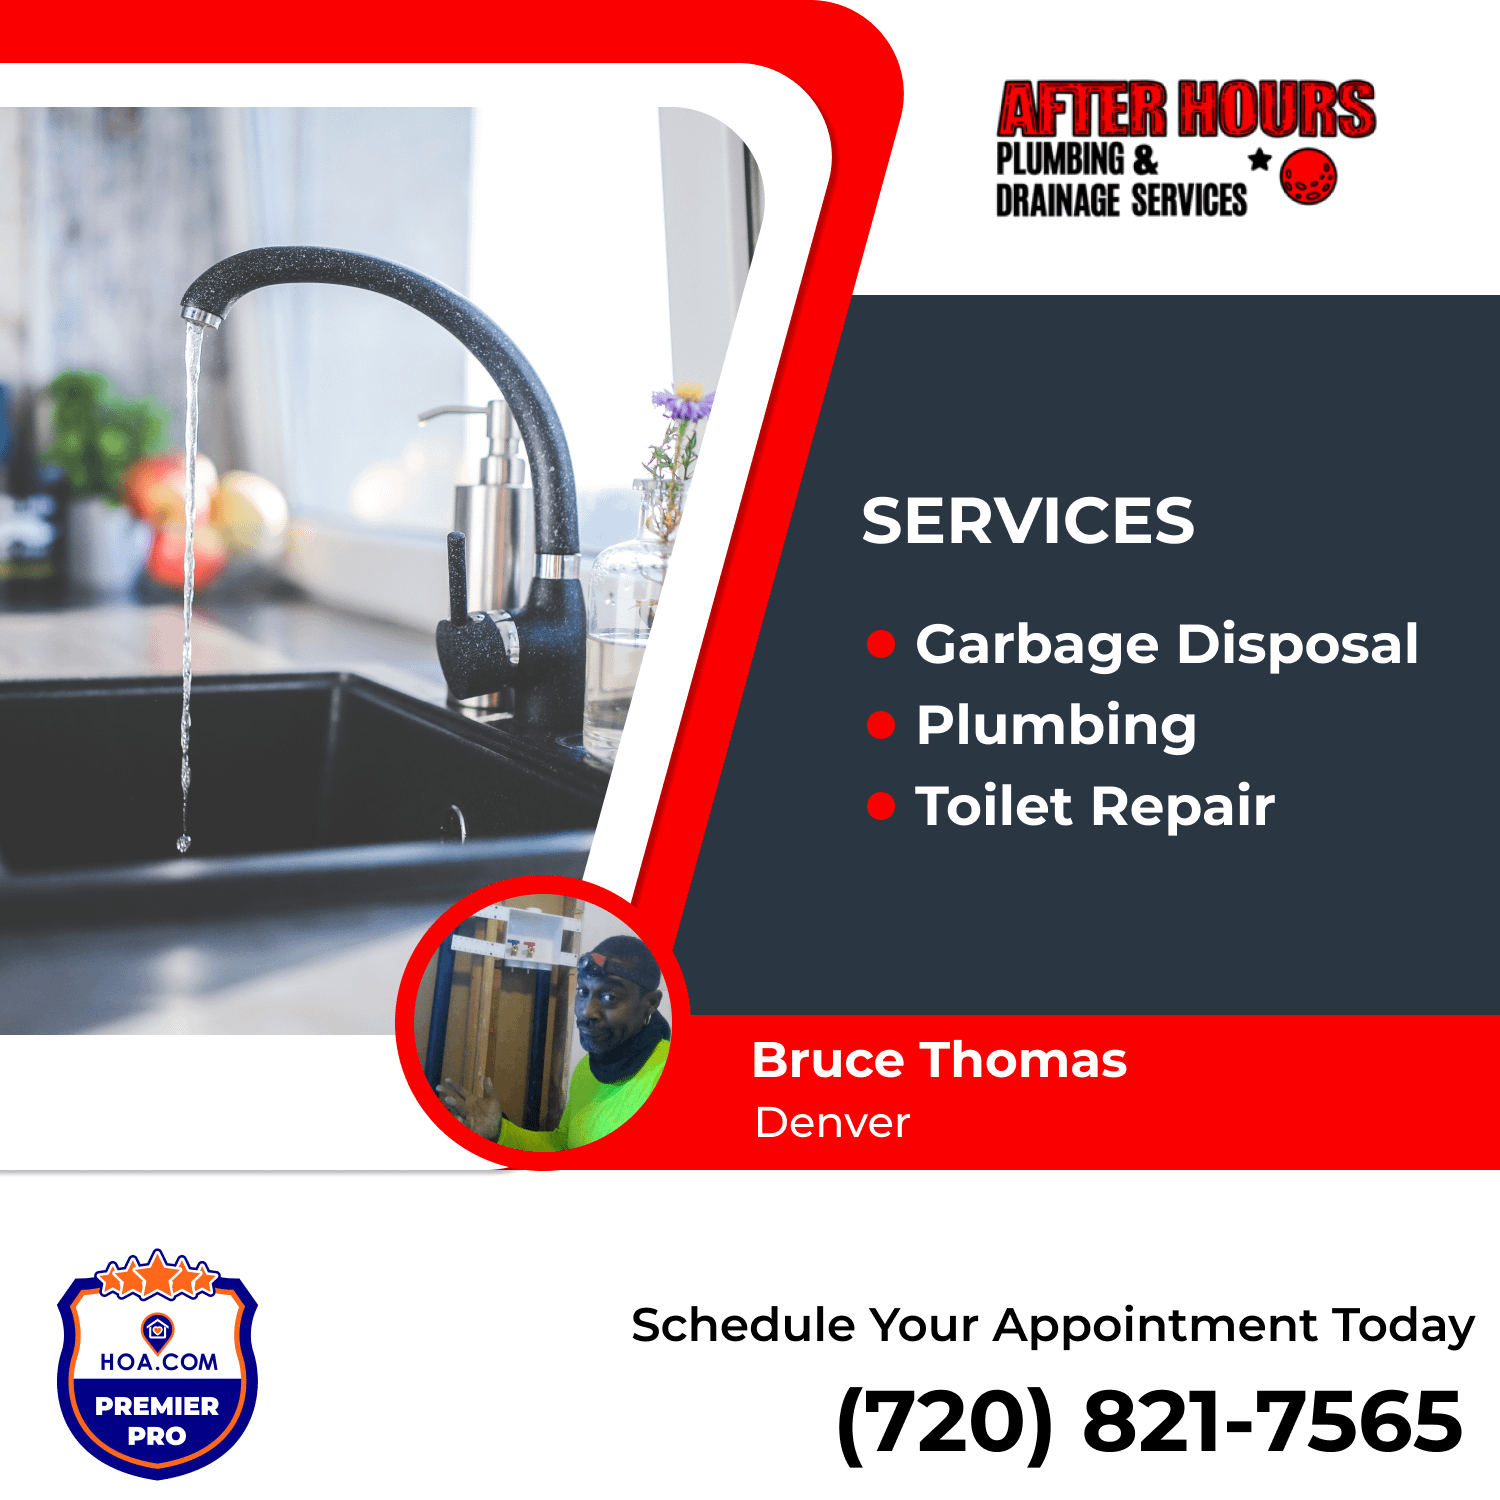 Premier Pro After Hours Plumbing and Drainage Services